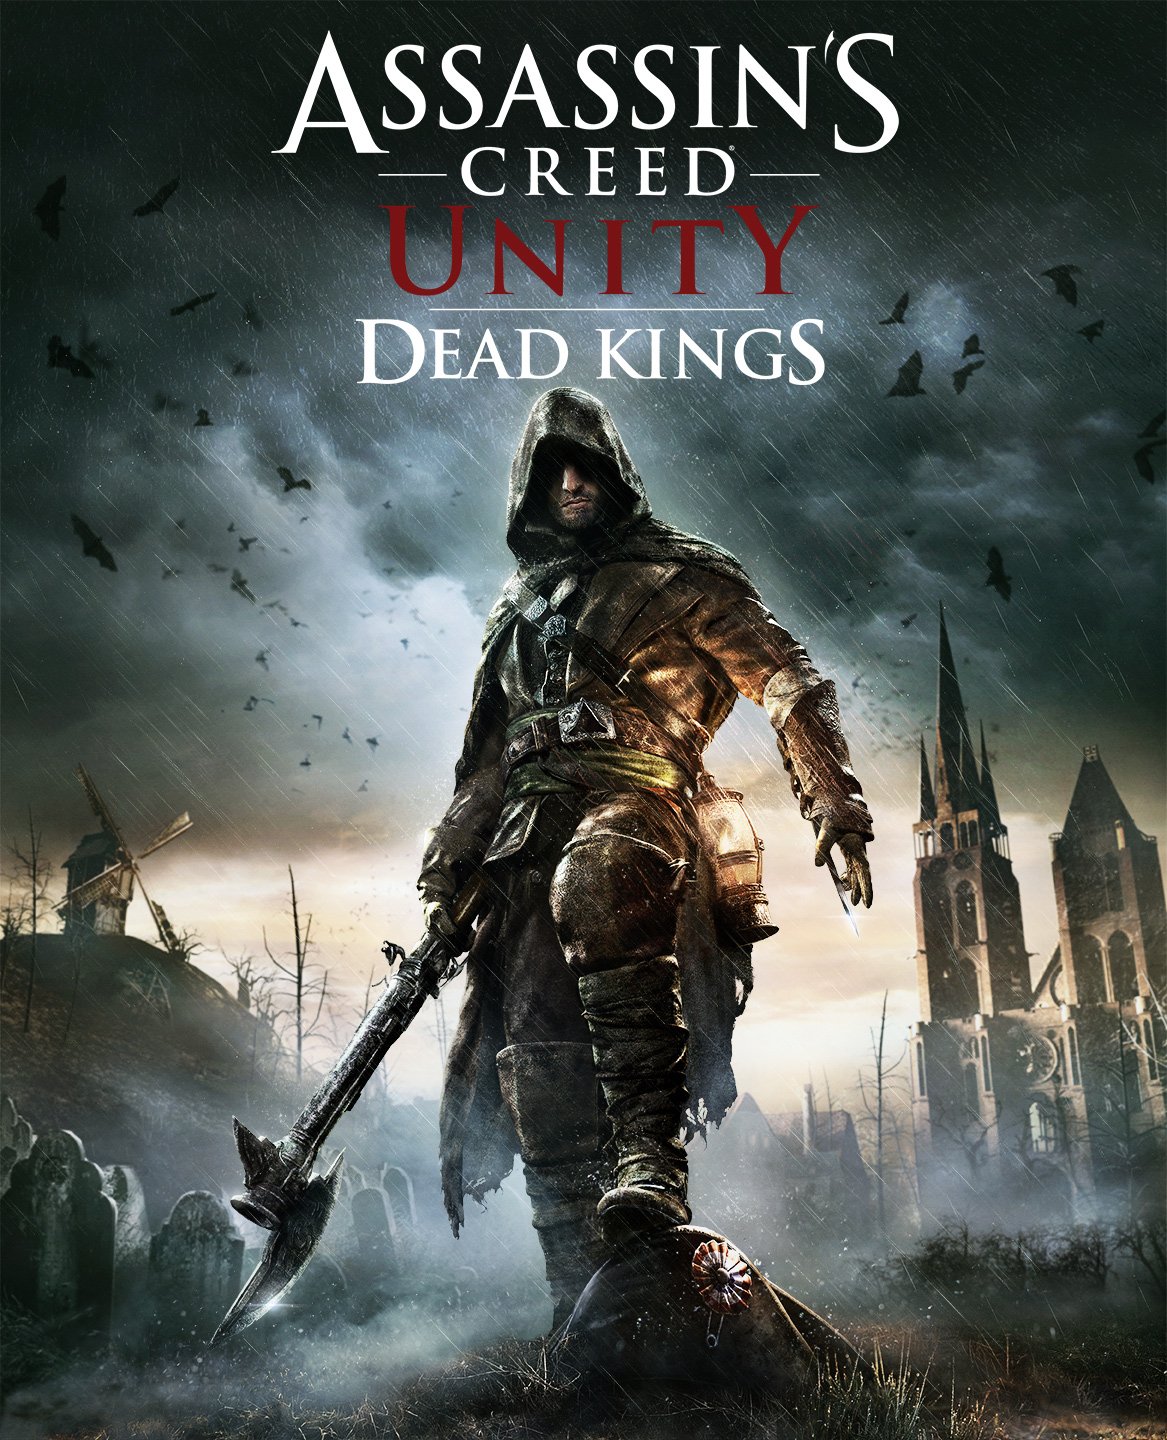 Assassin's Creed Unity - Dead Kings